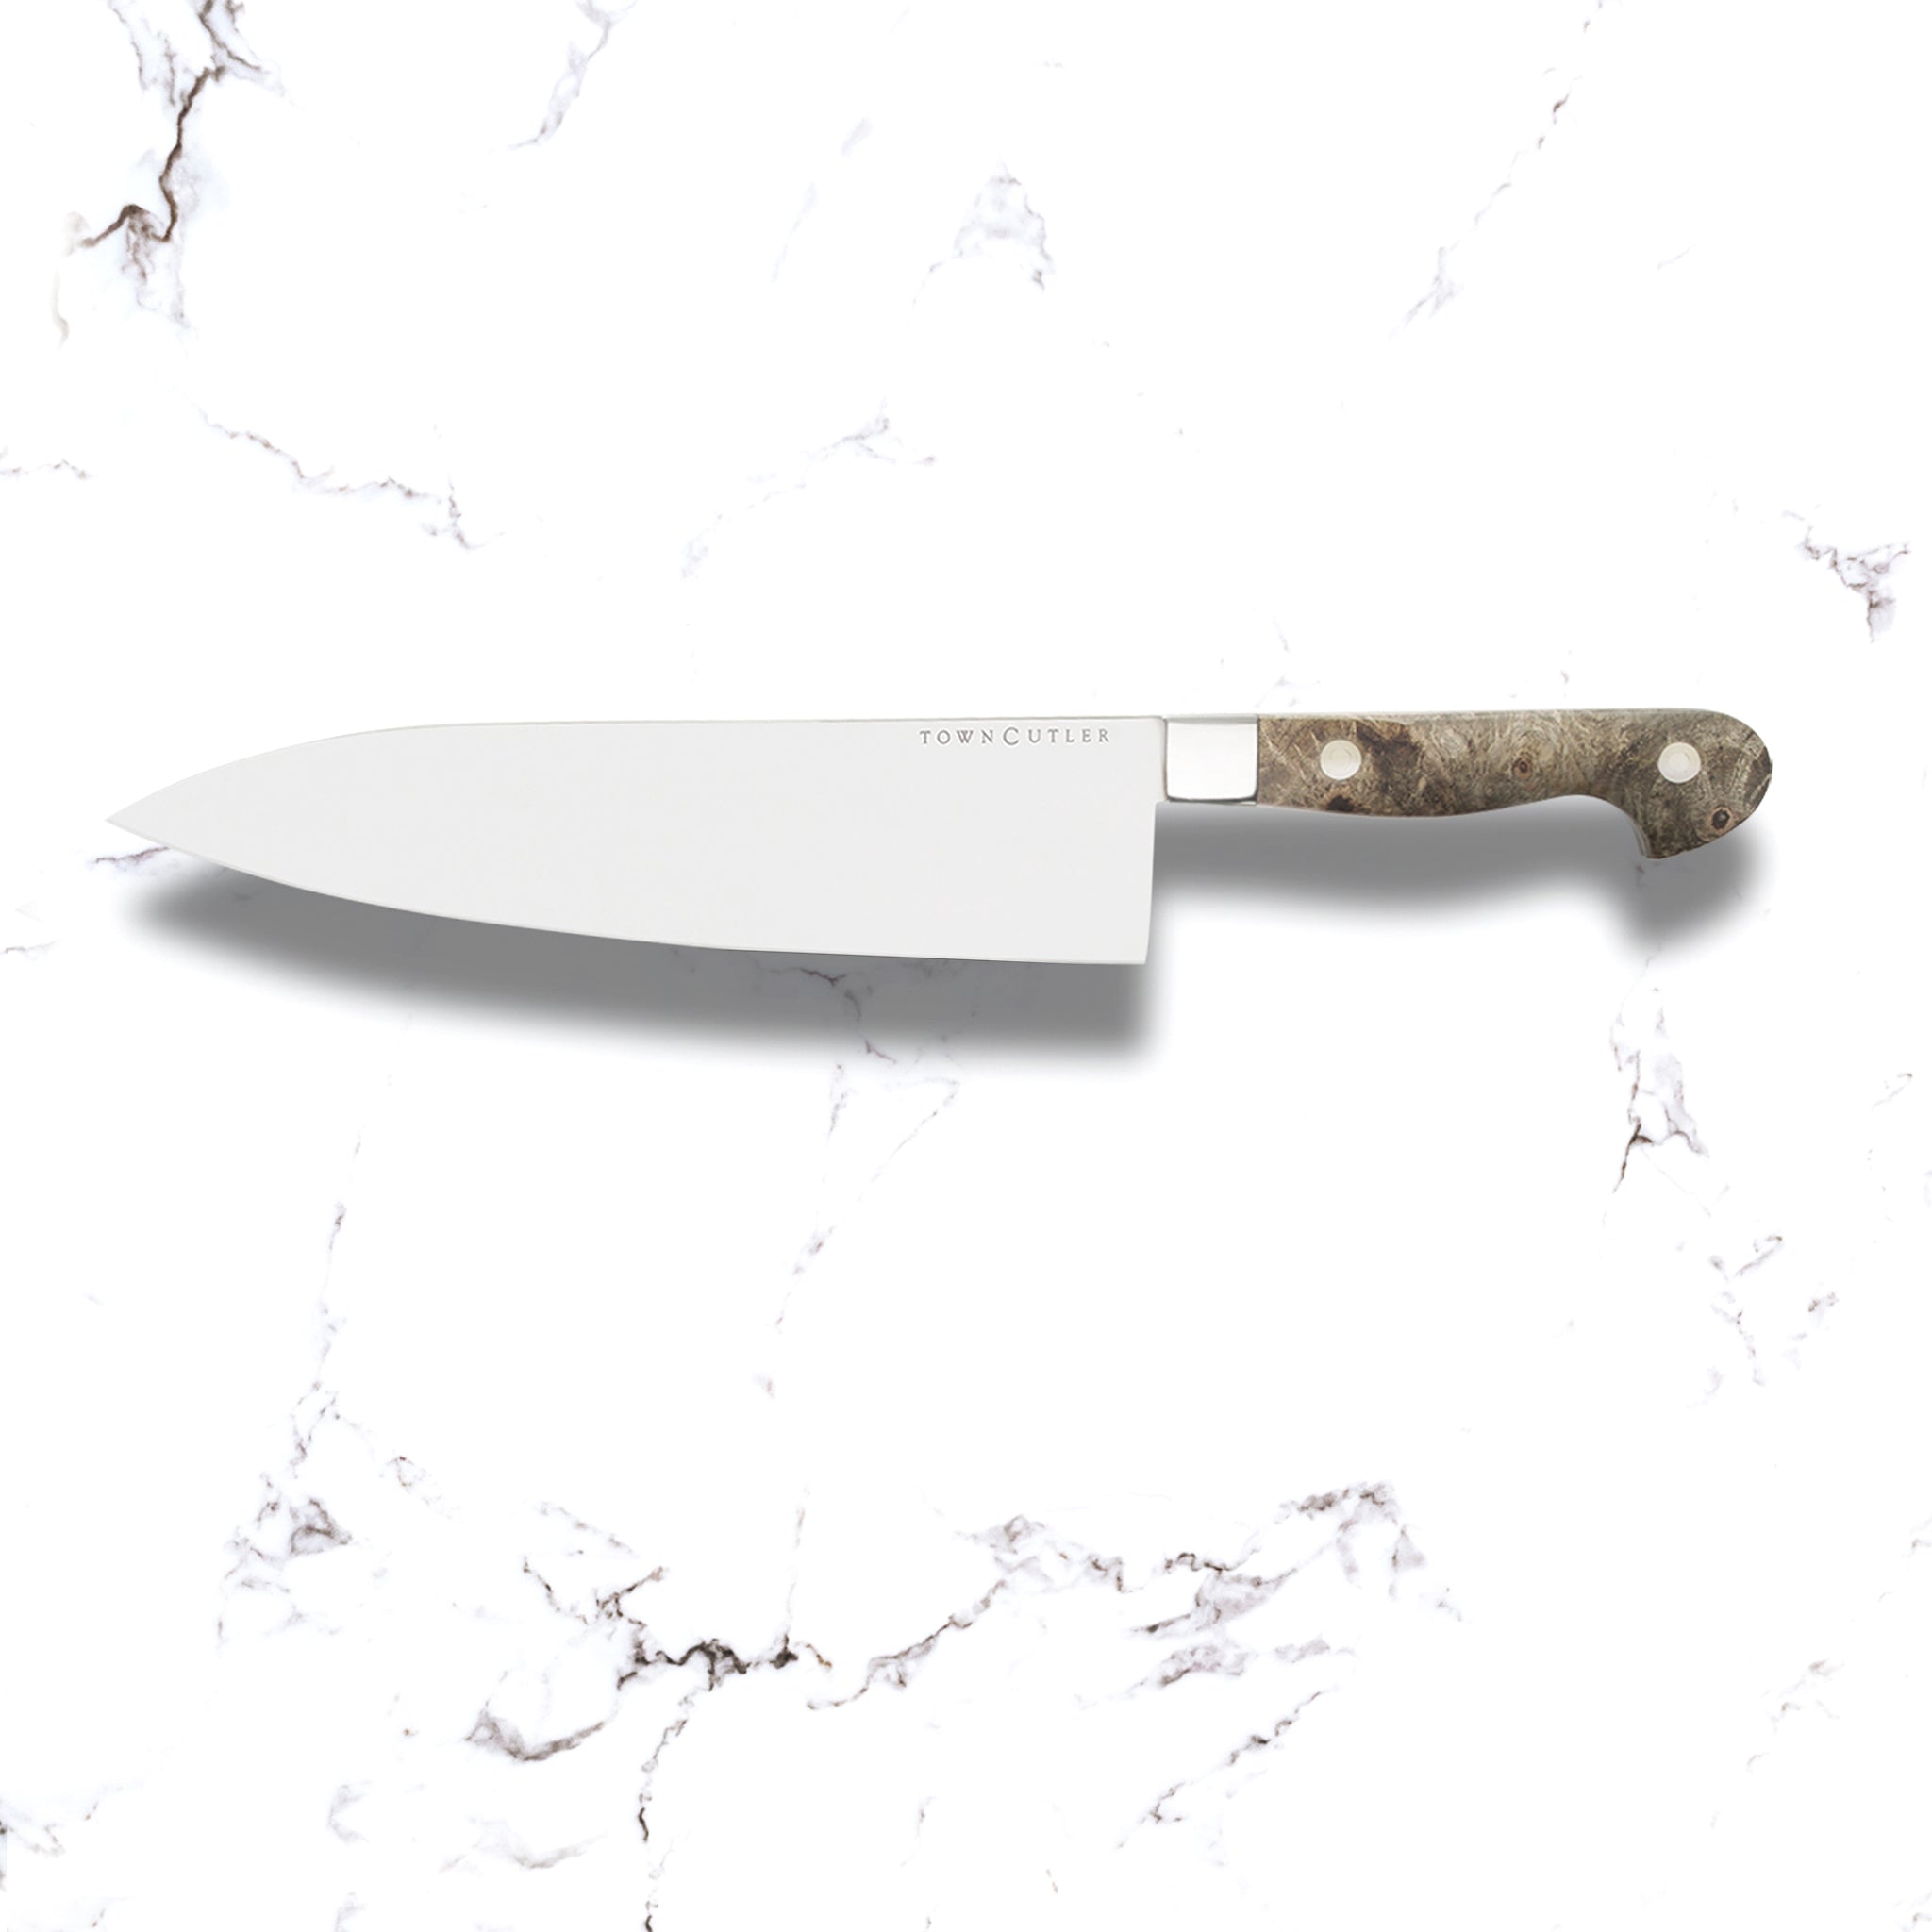 8.5" stainless steel Chef Knife - Classic - Town Cutler